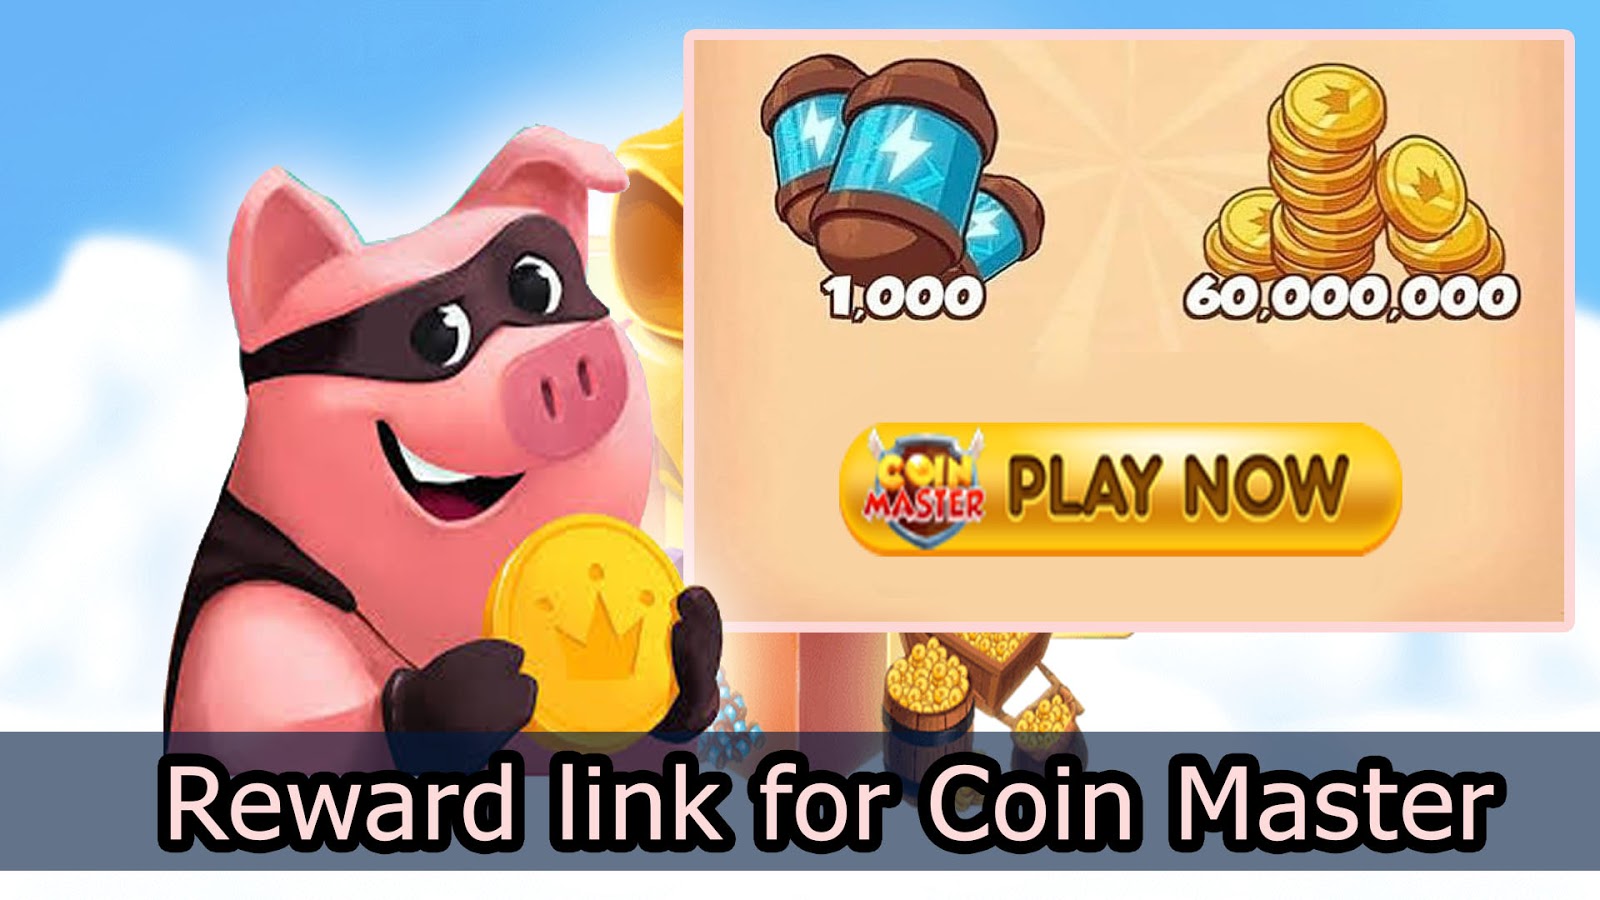 Coin Master Daily Rewards Link